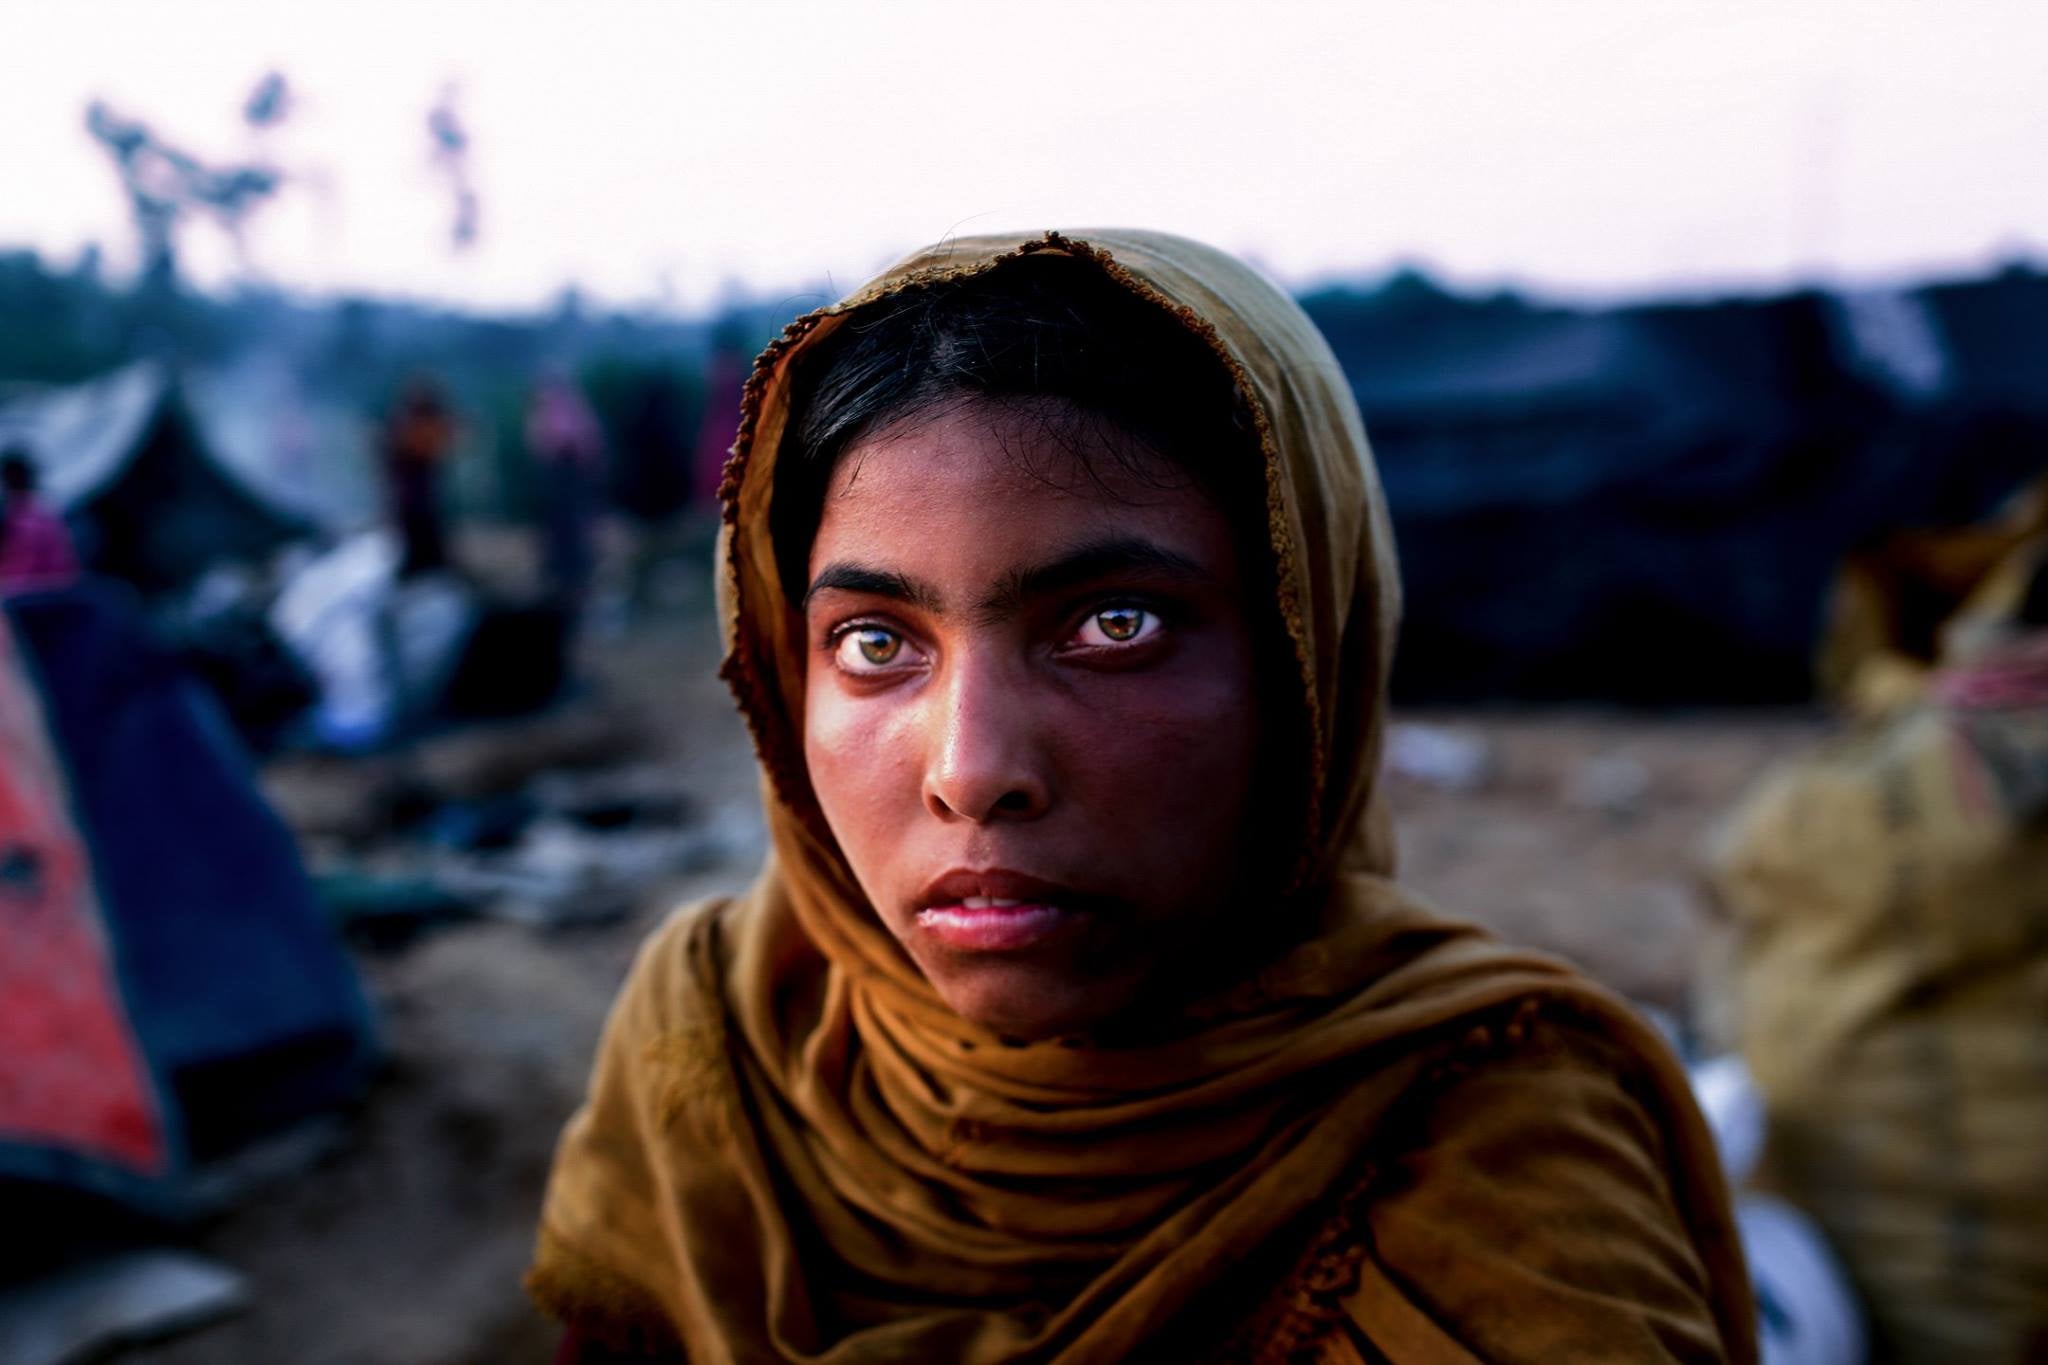 Shima (16) traveled miles after miles with her family from Myanmar to enter Bangladesh for safe refuge.